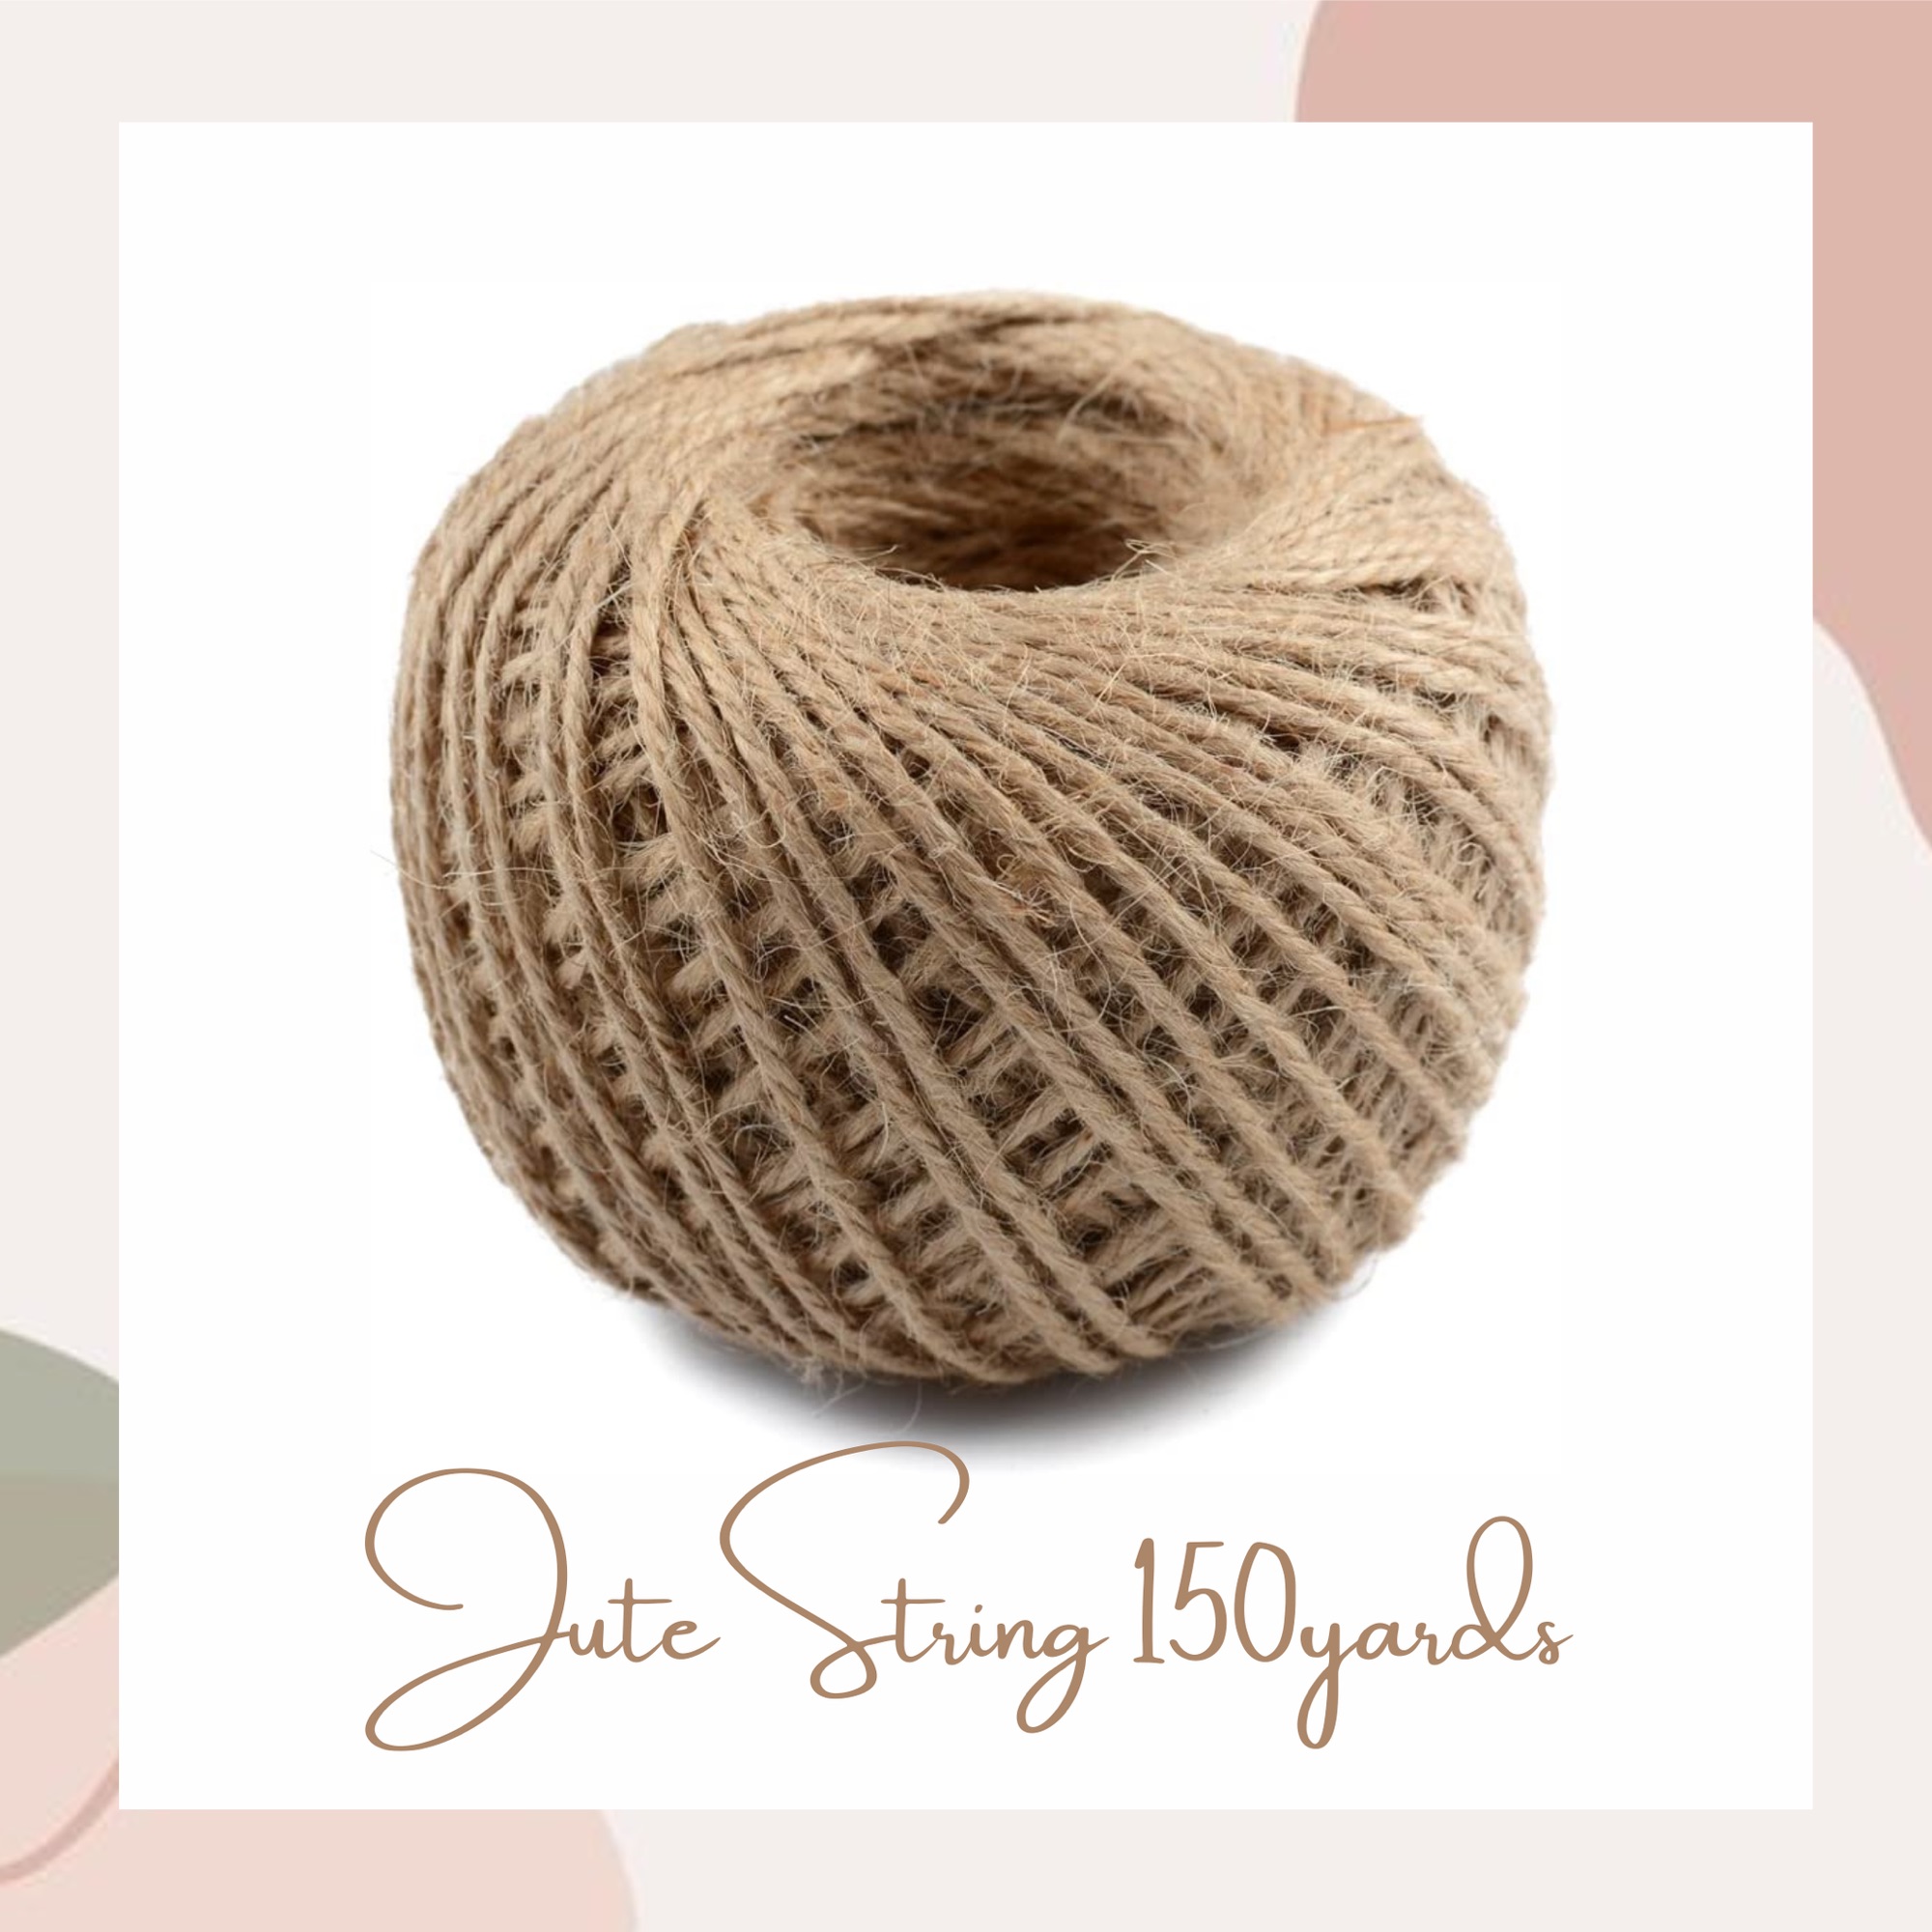 5 Rolls 2mmx50meter Natural Jute Twine Rope String for Craft